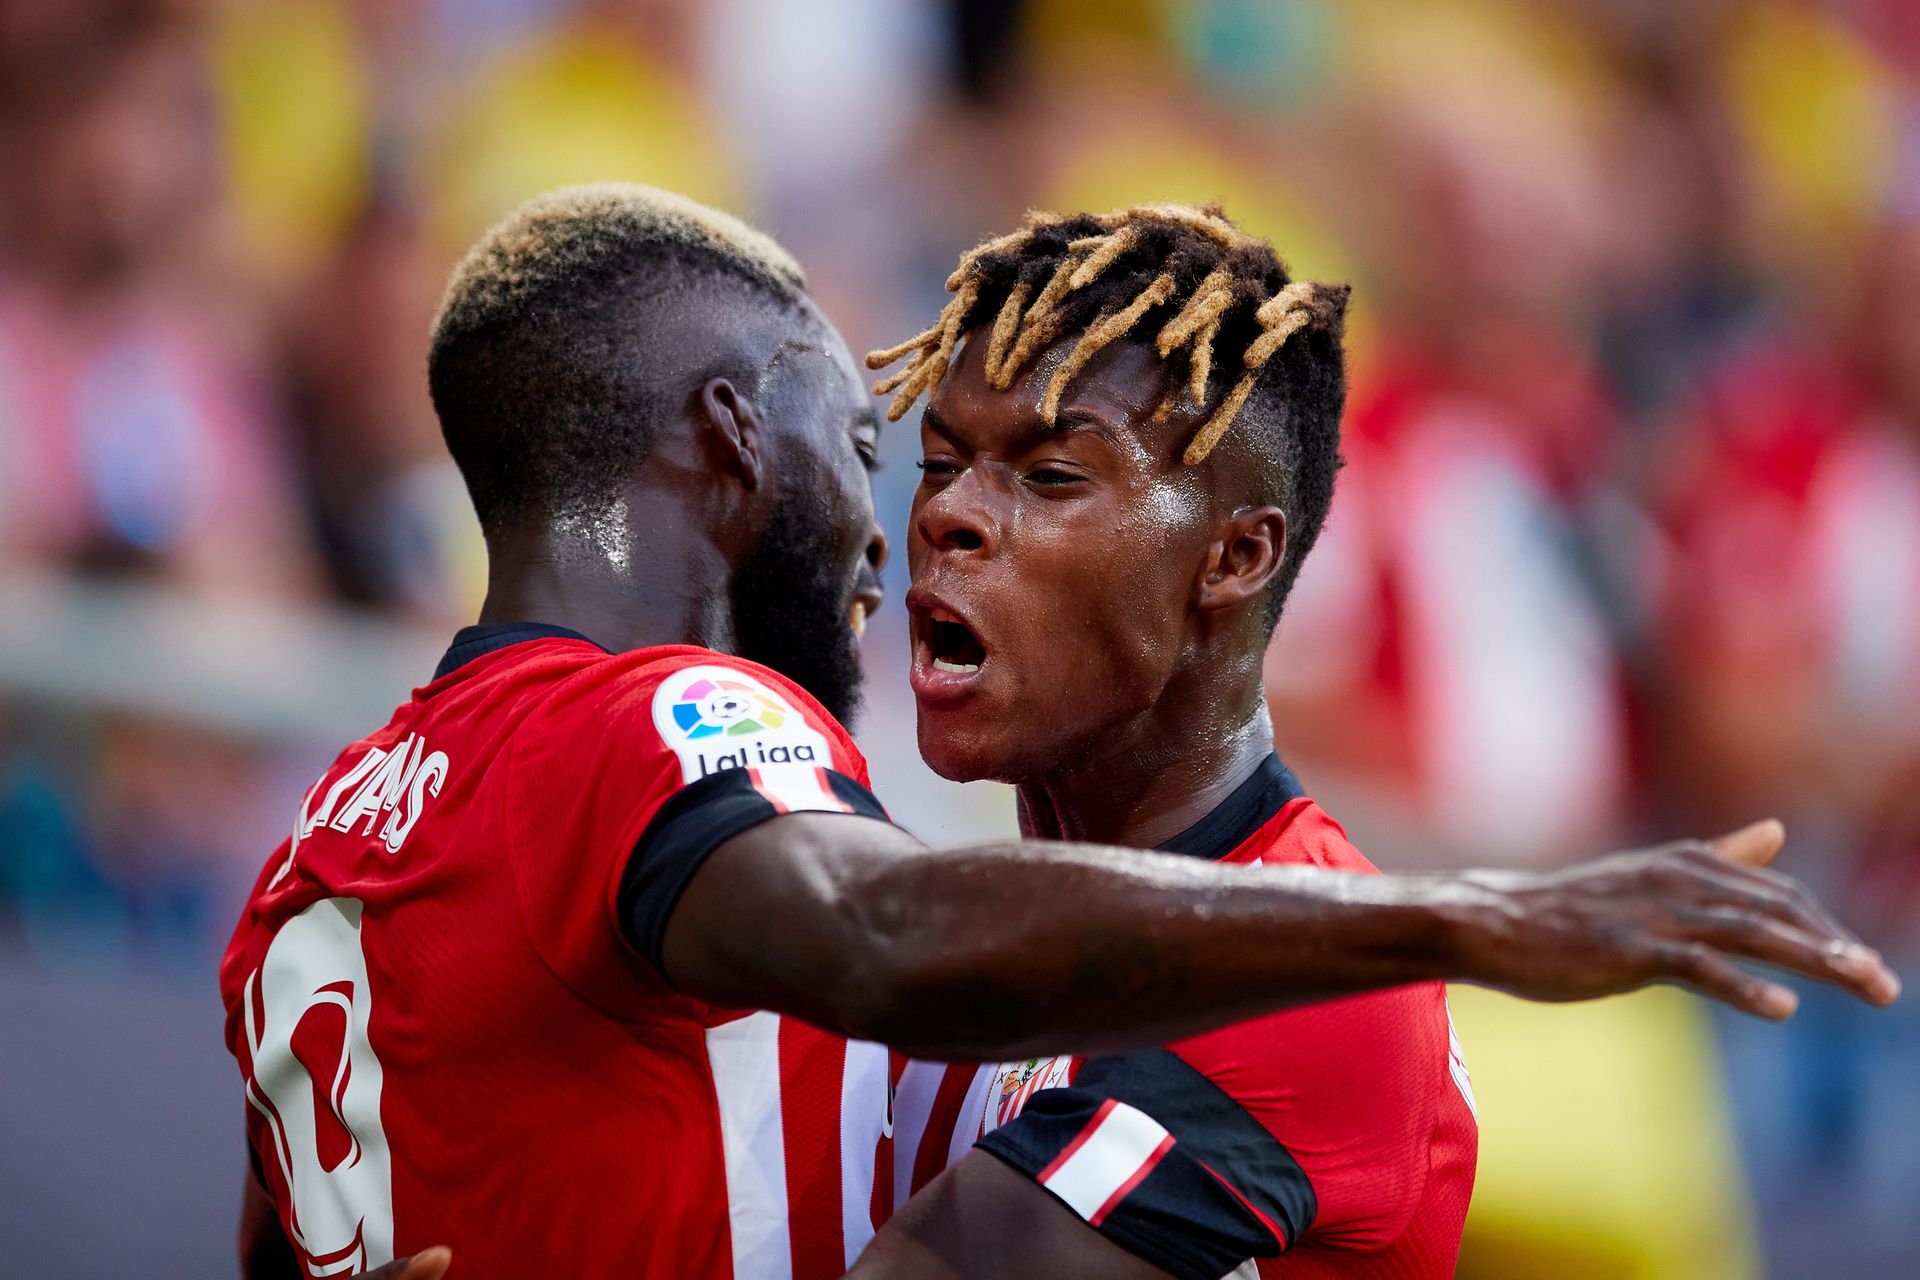 <p>                     Born in northern Spain to Ghanaian parents, Iñaki and Nico Williams have both become idols in Bilbao with Athletic Club.                   </p>                                      <p>                     Forward Iñaki is eight years older than his brother and switched international allegiance to represent Ghana after winning just one cap with Spain. Nico, a winger, plays for La Roja.                   </p>